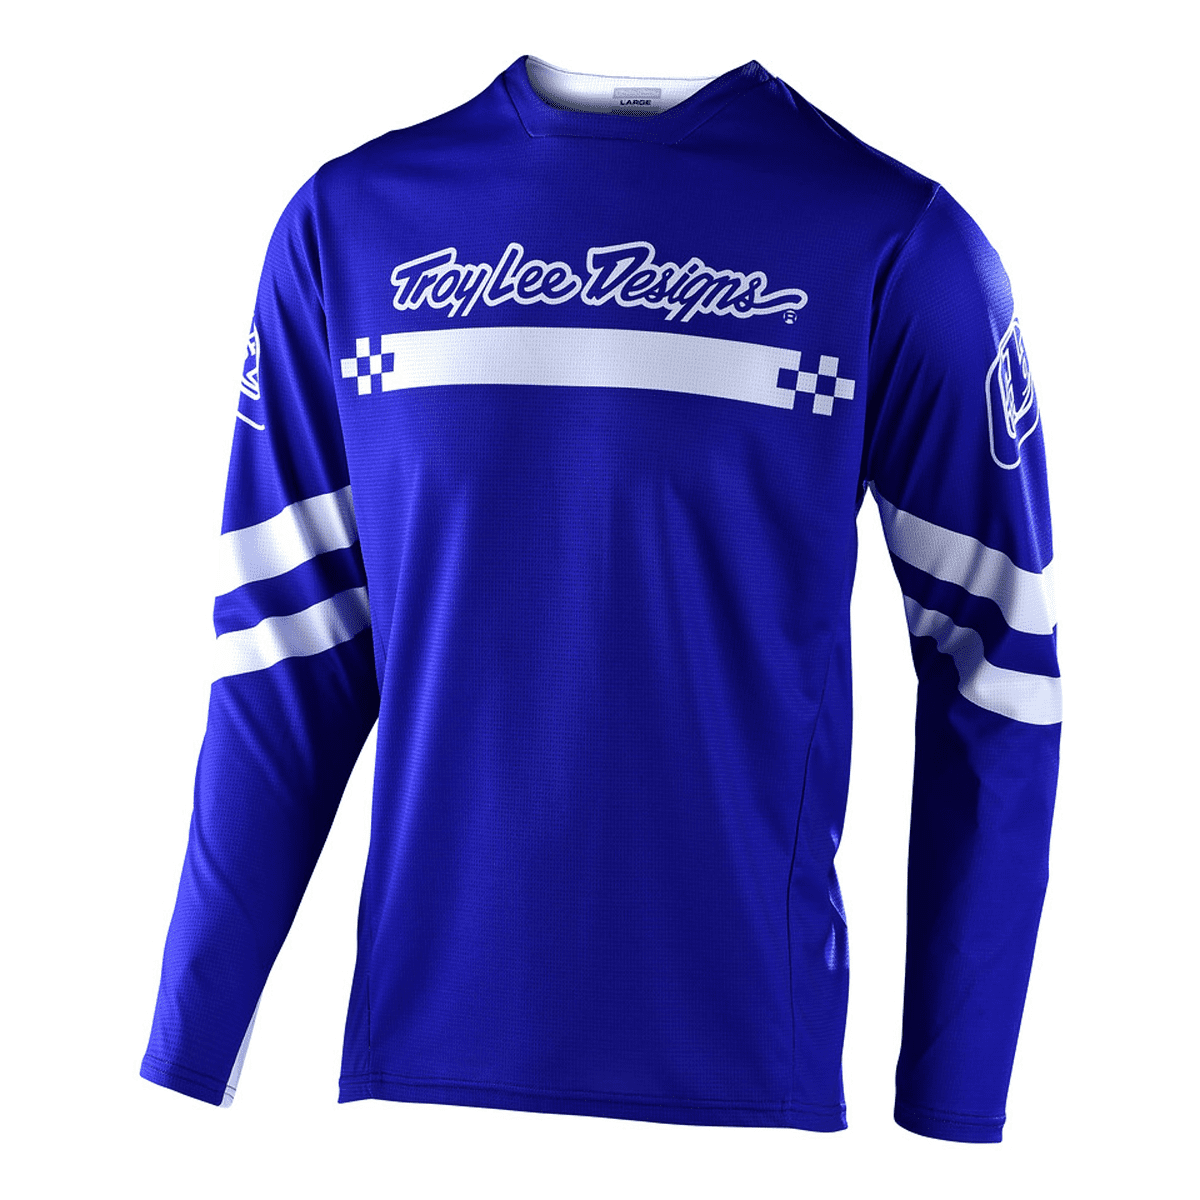 tld jersey